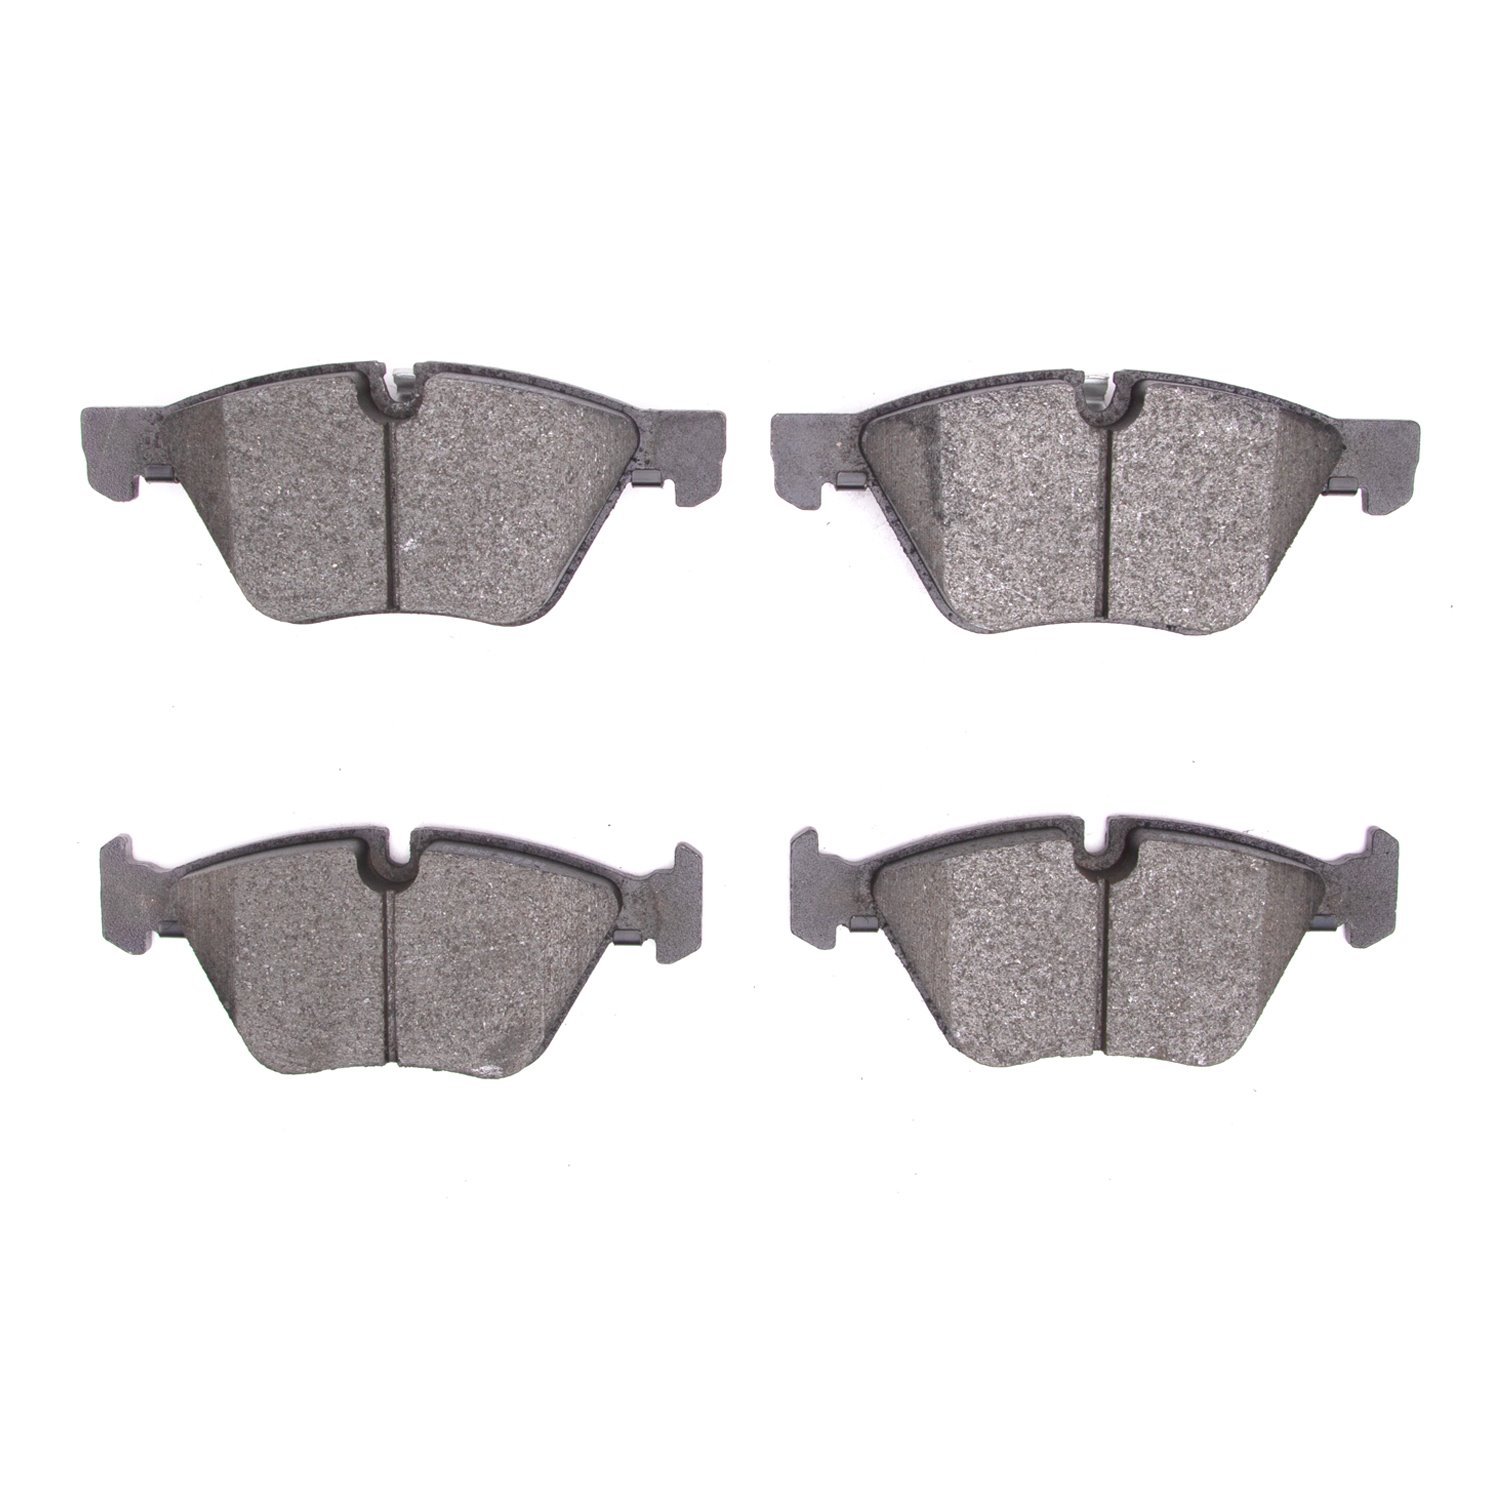 Performance Sport Brake Pads, 2006-2016 BMW, Position: Front